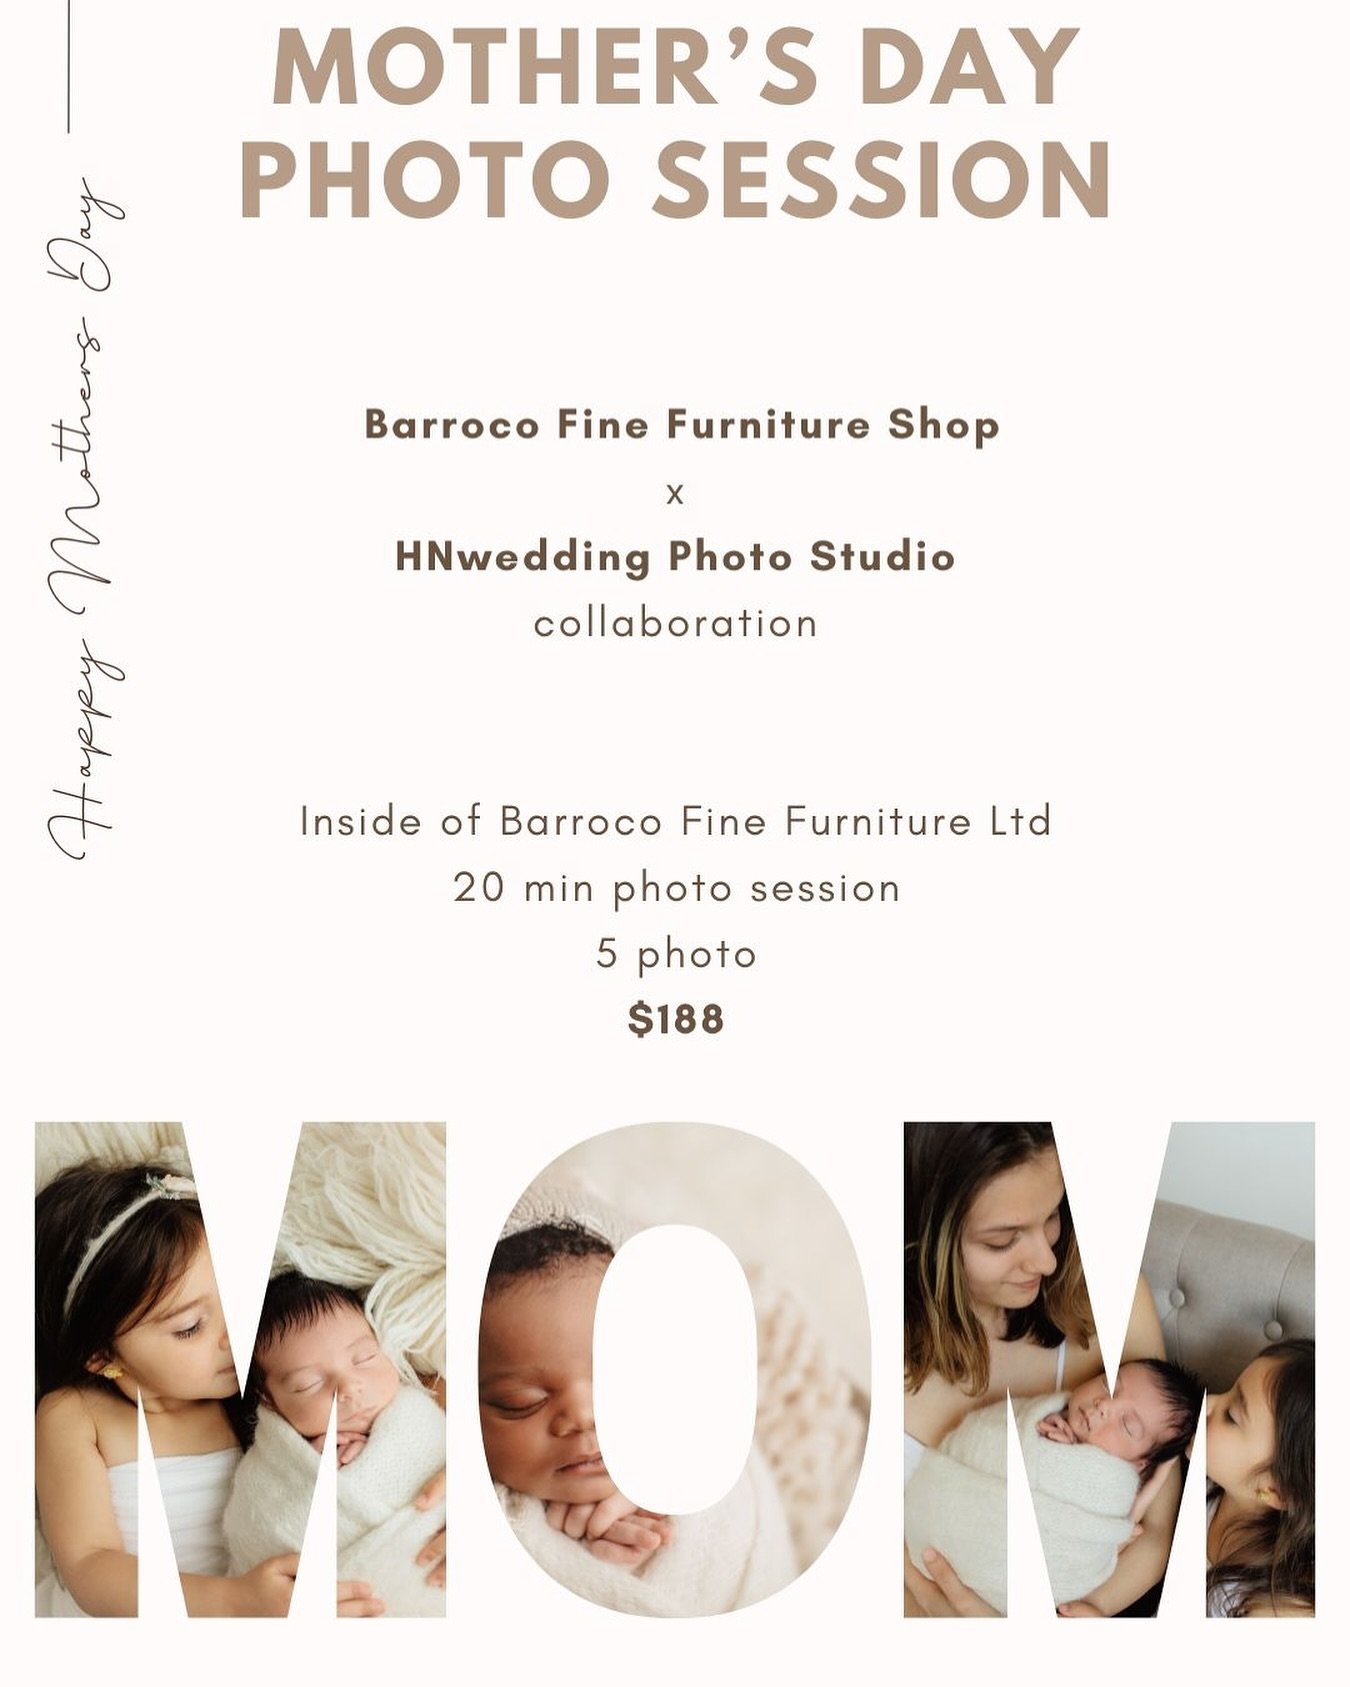 📸 **Celebrate Mother&rsquo;s Day with a Heartfelt Photoshoot!** 💖 

Make this Mother&rsquo;s Day unforgettable with a special photoshoot experience! Capture the love and bond between you and your mom in beautifully crafted photos that you&rsquo;ll 